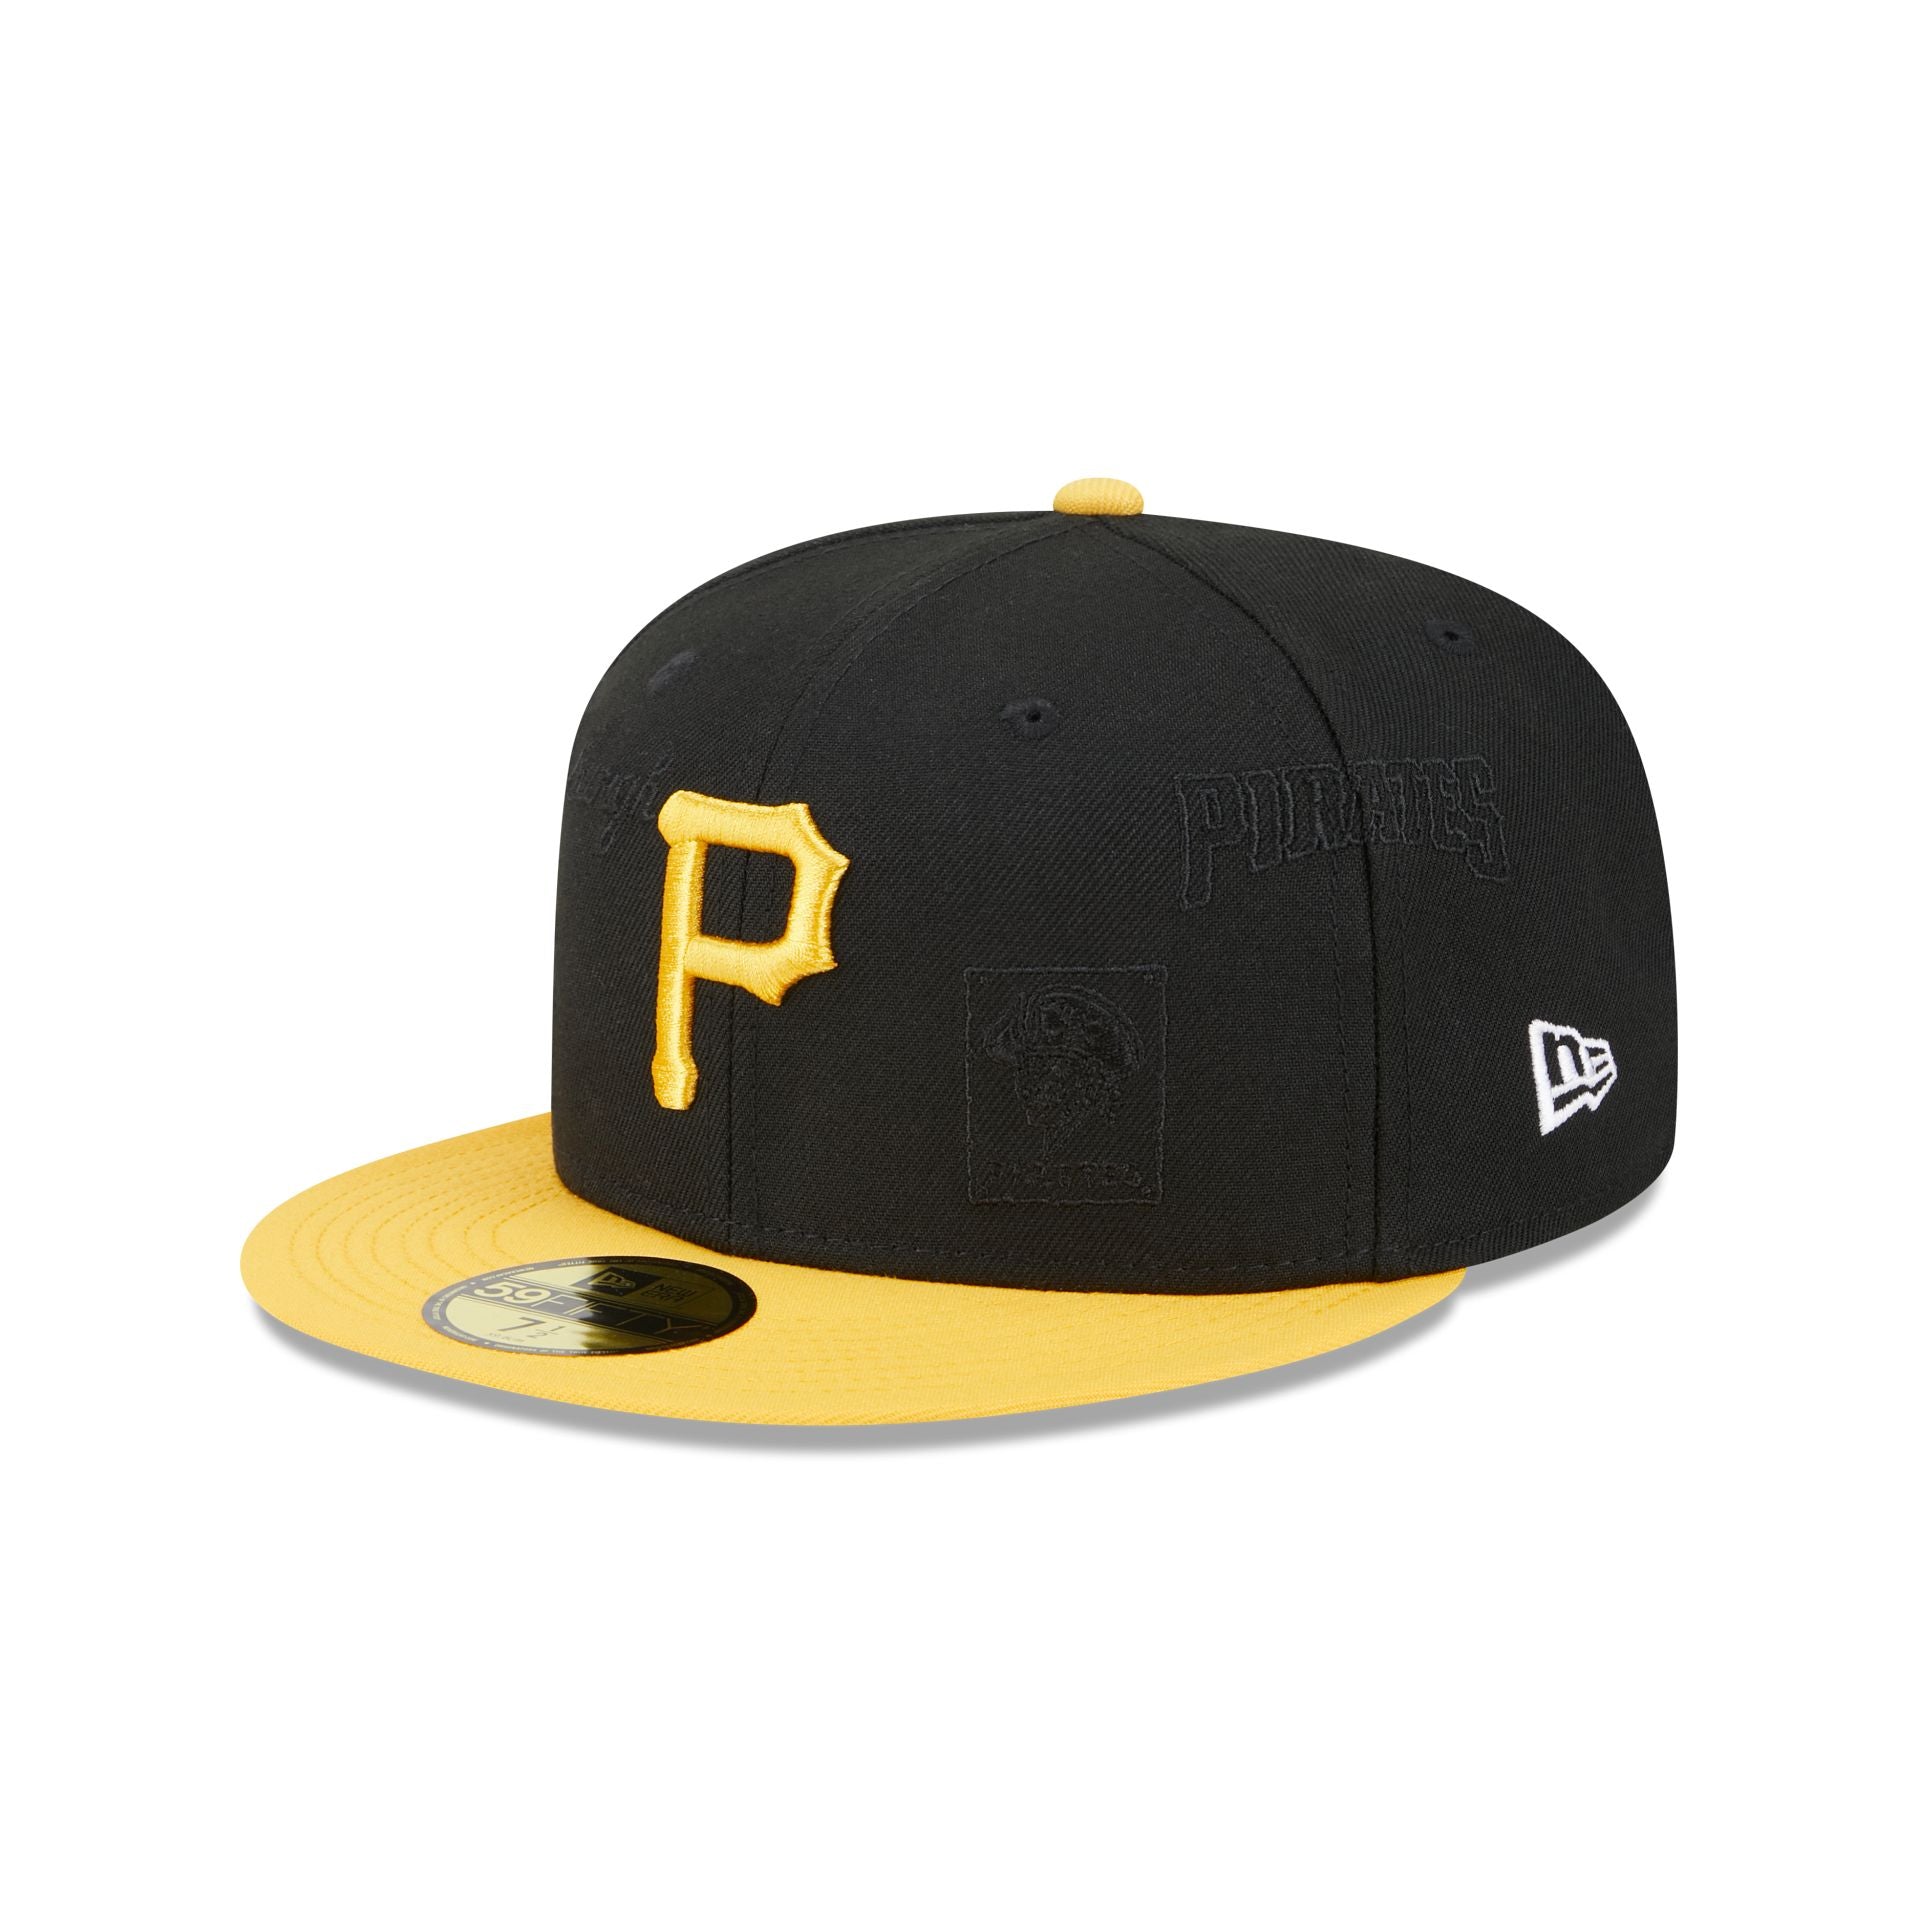 Lids Pittsburgh Pirates New Era Spring Color Basic 9FIFTY Snapback